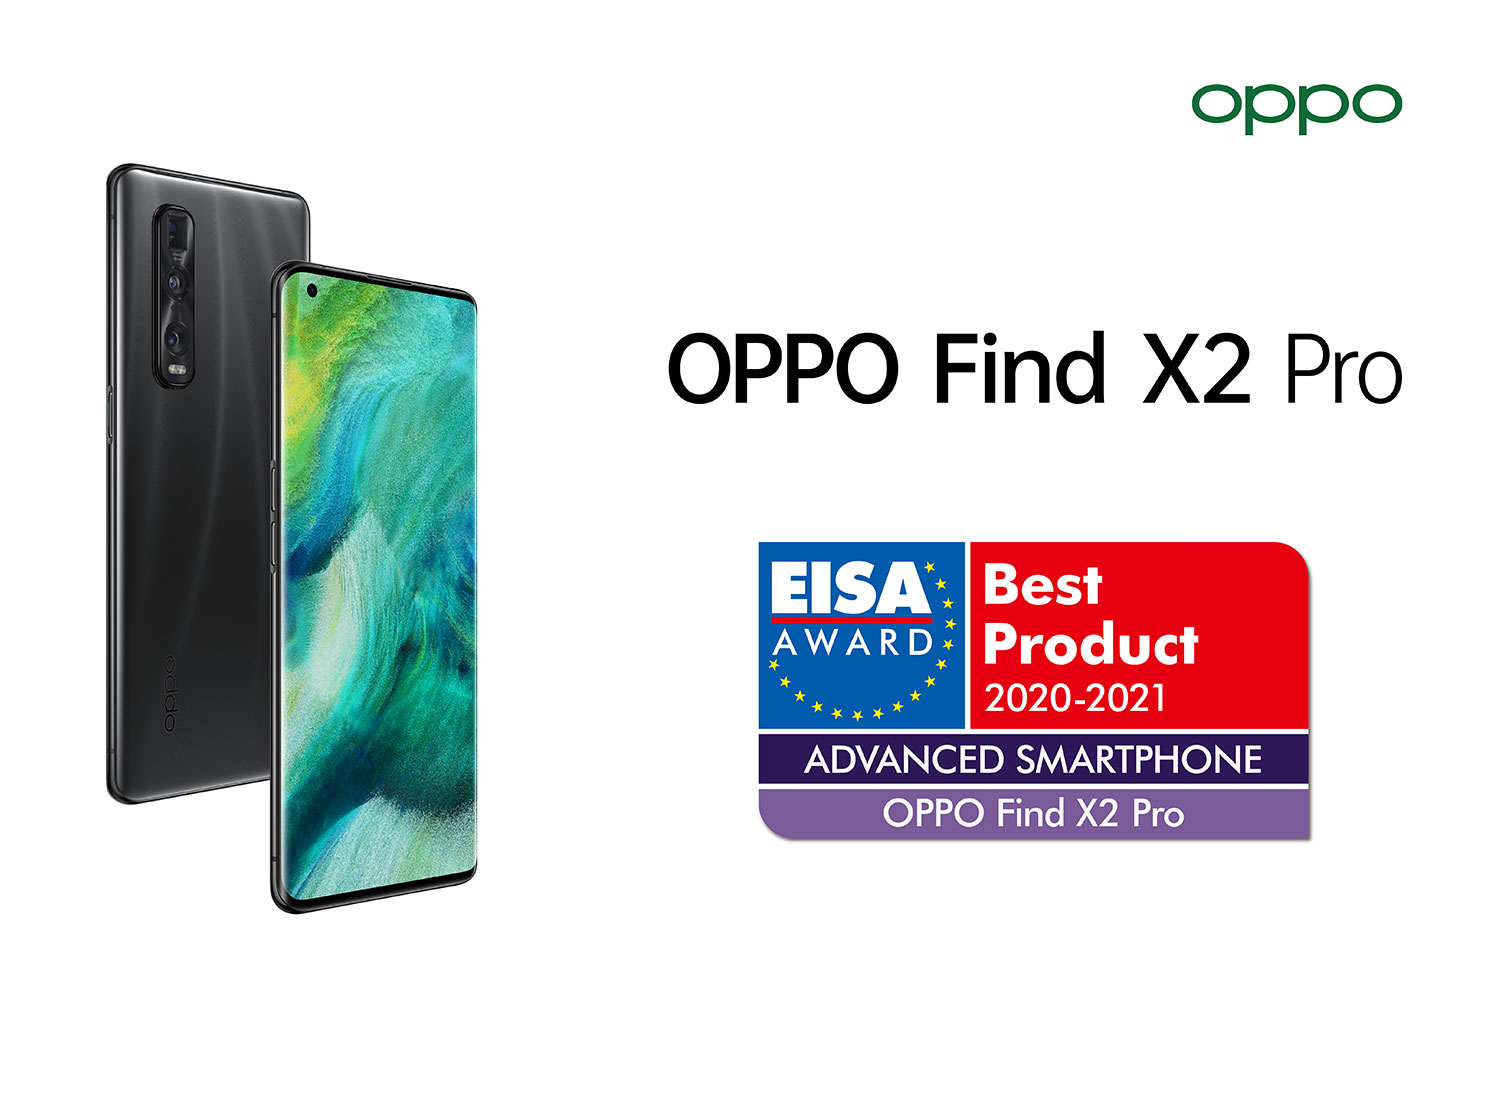 OPPO Wins EISA ADVANCED SMARTPHONE 2020-2021 Award With